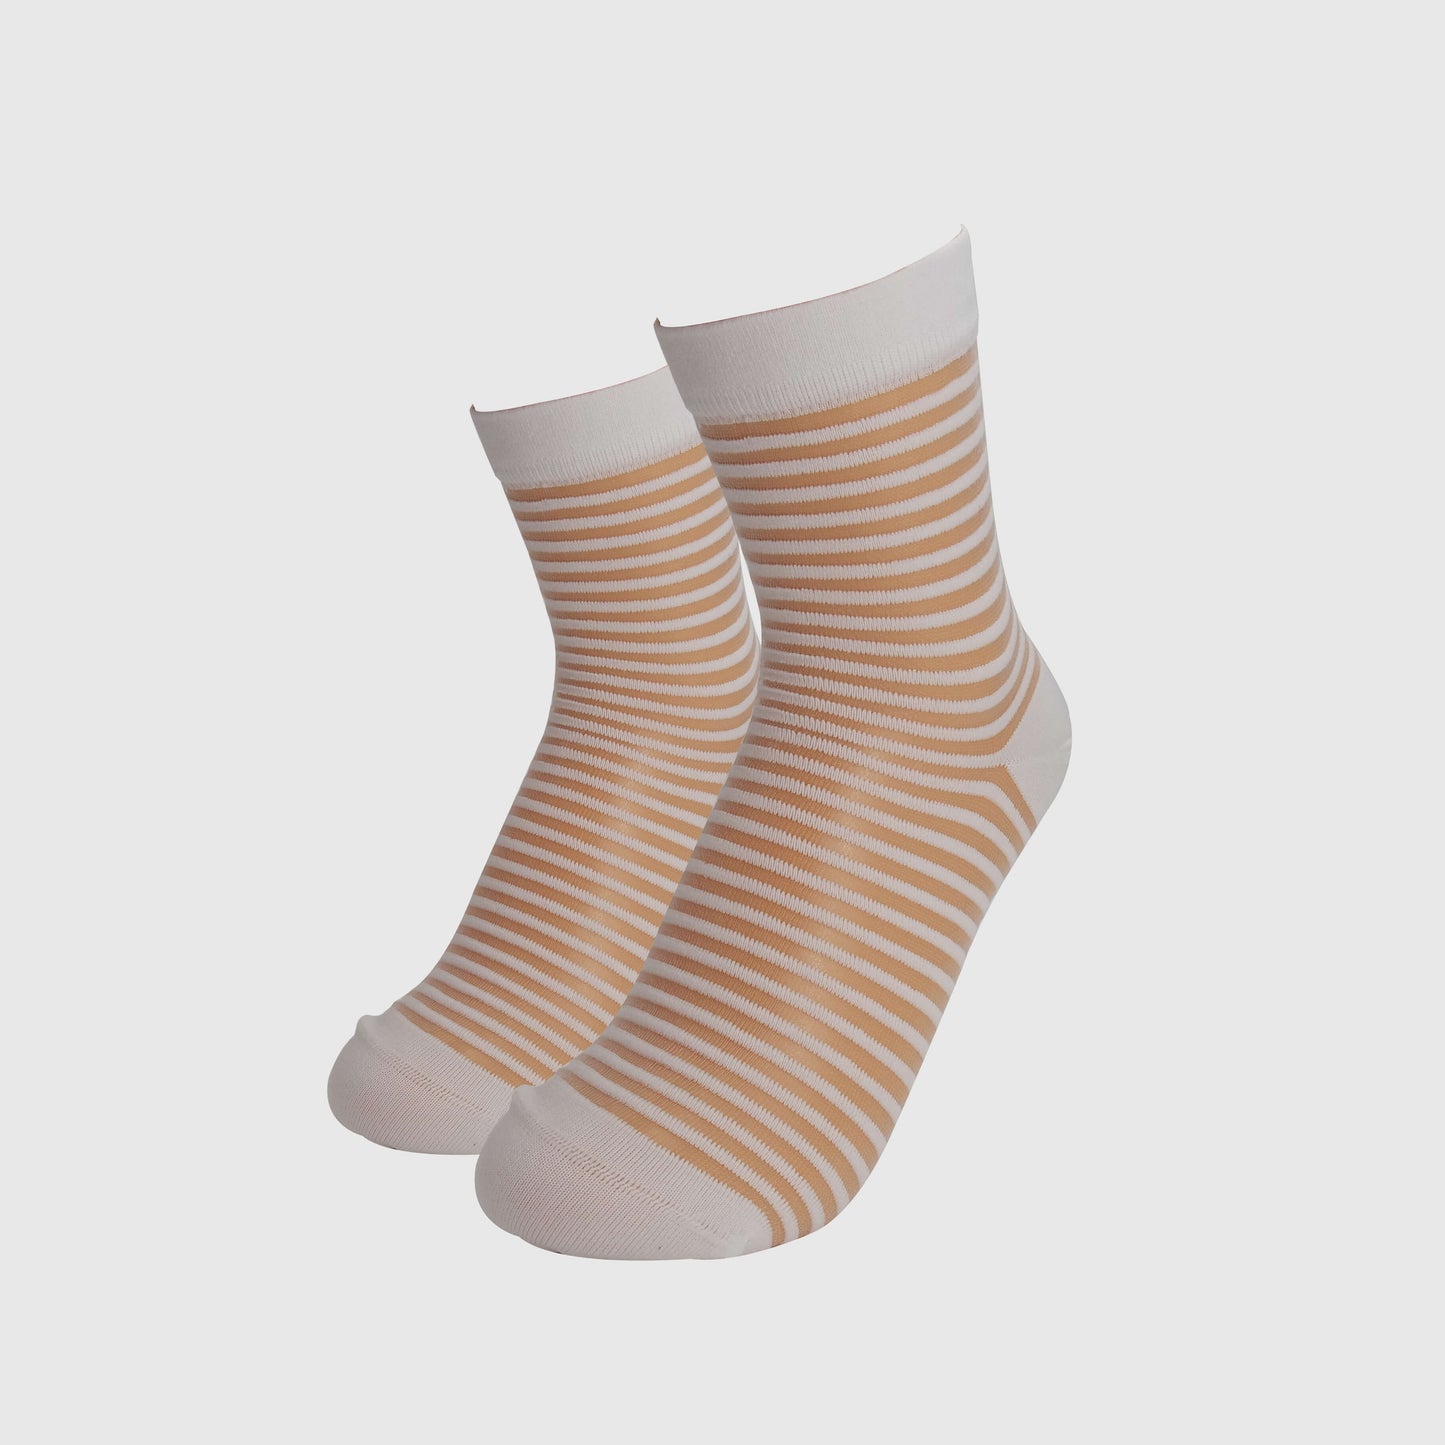 stylish white sheer socks, adding an elegant and sophisticated touch to any outfit.